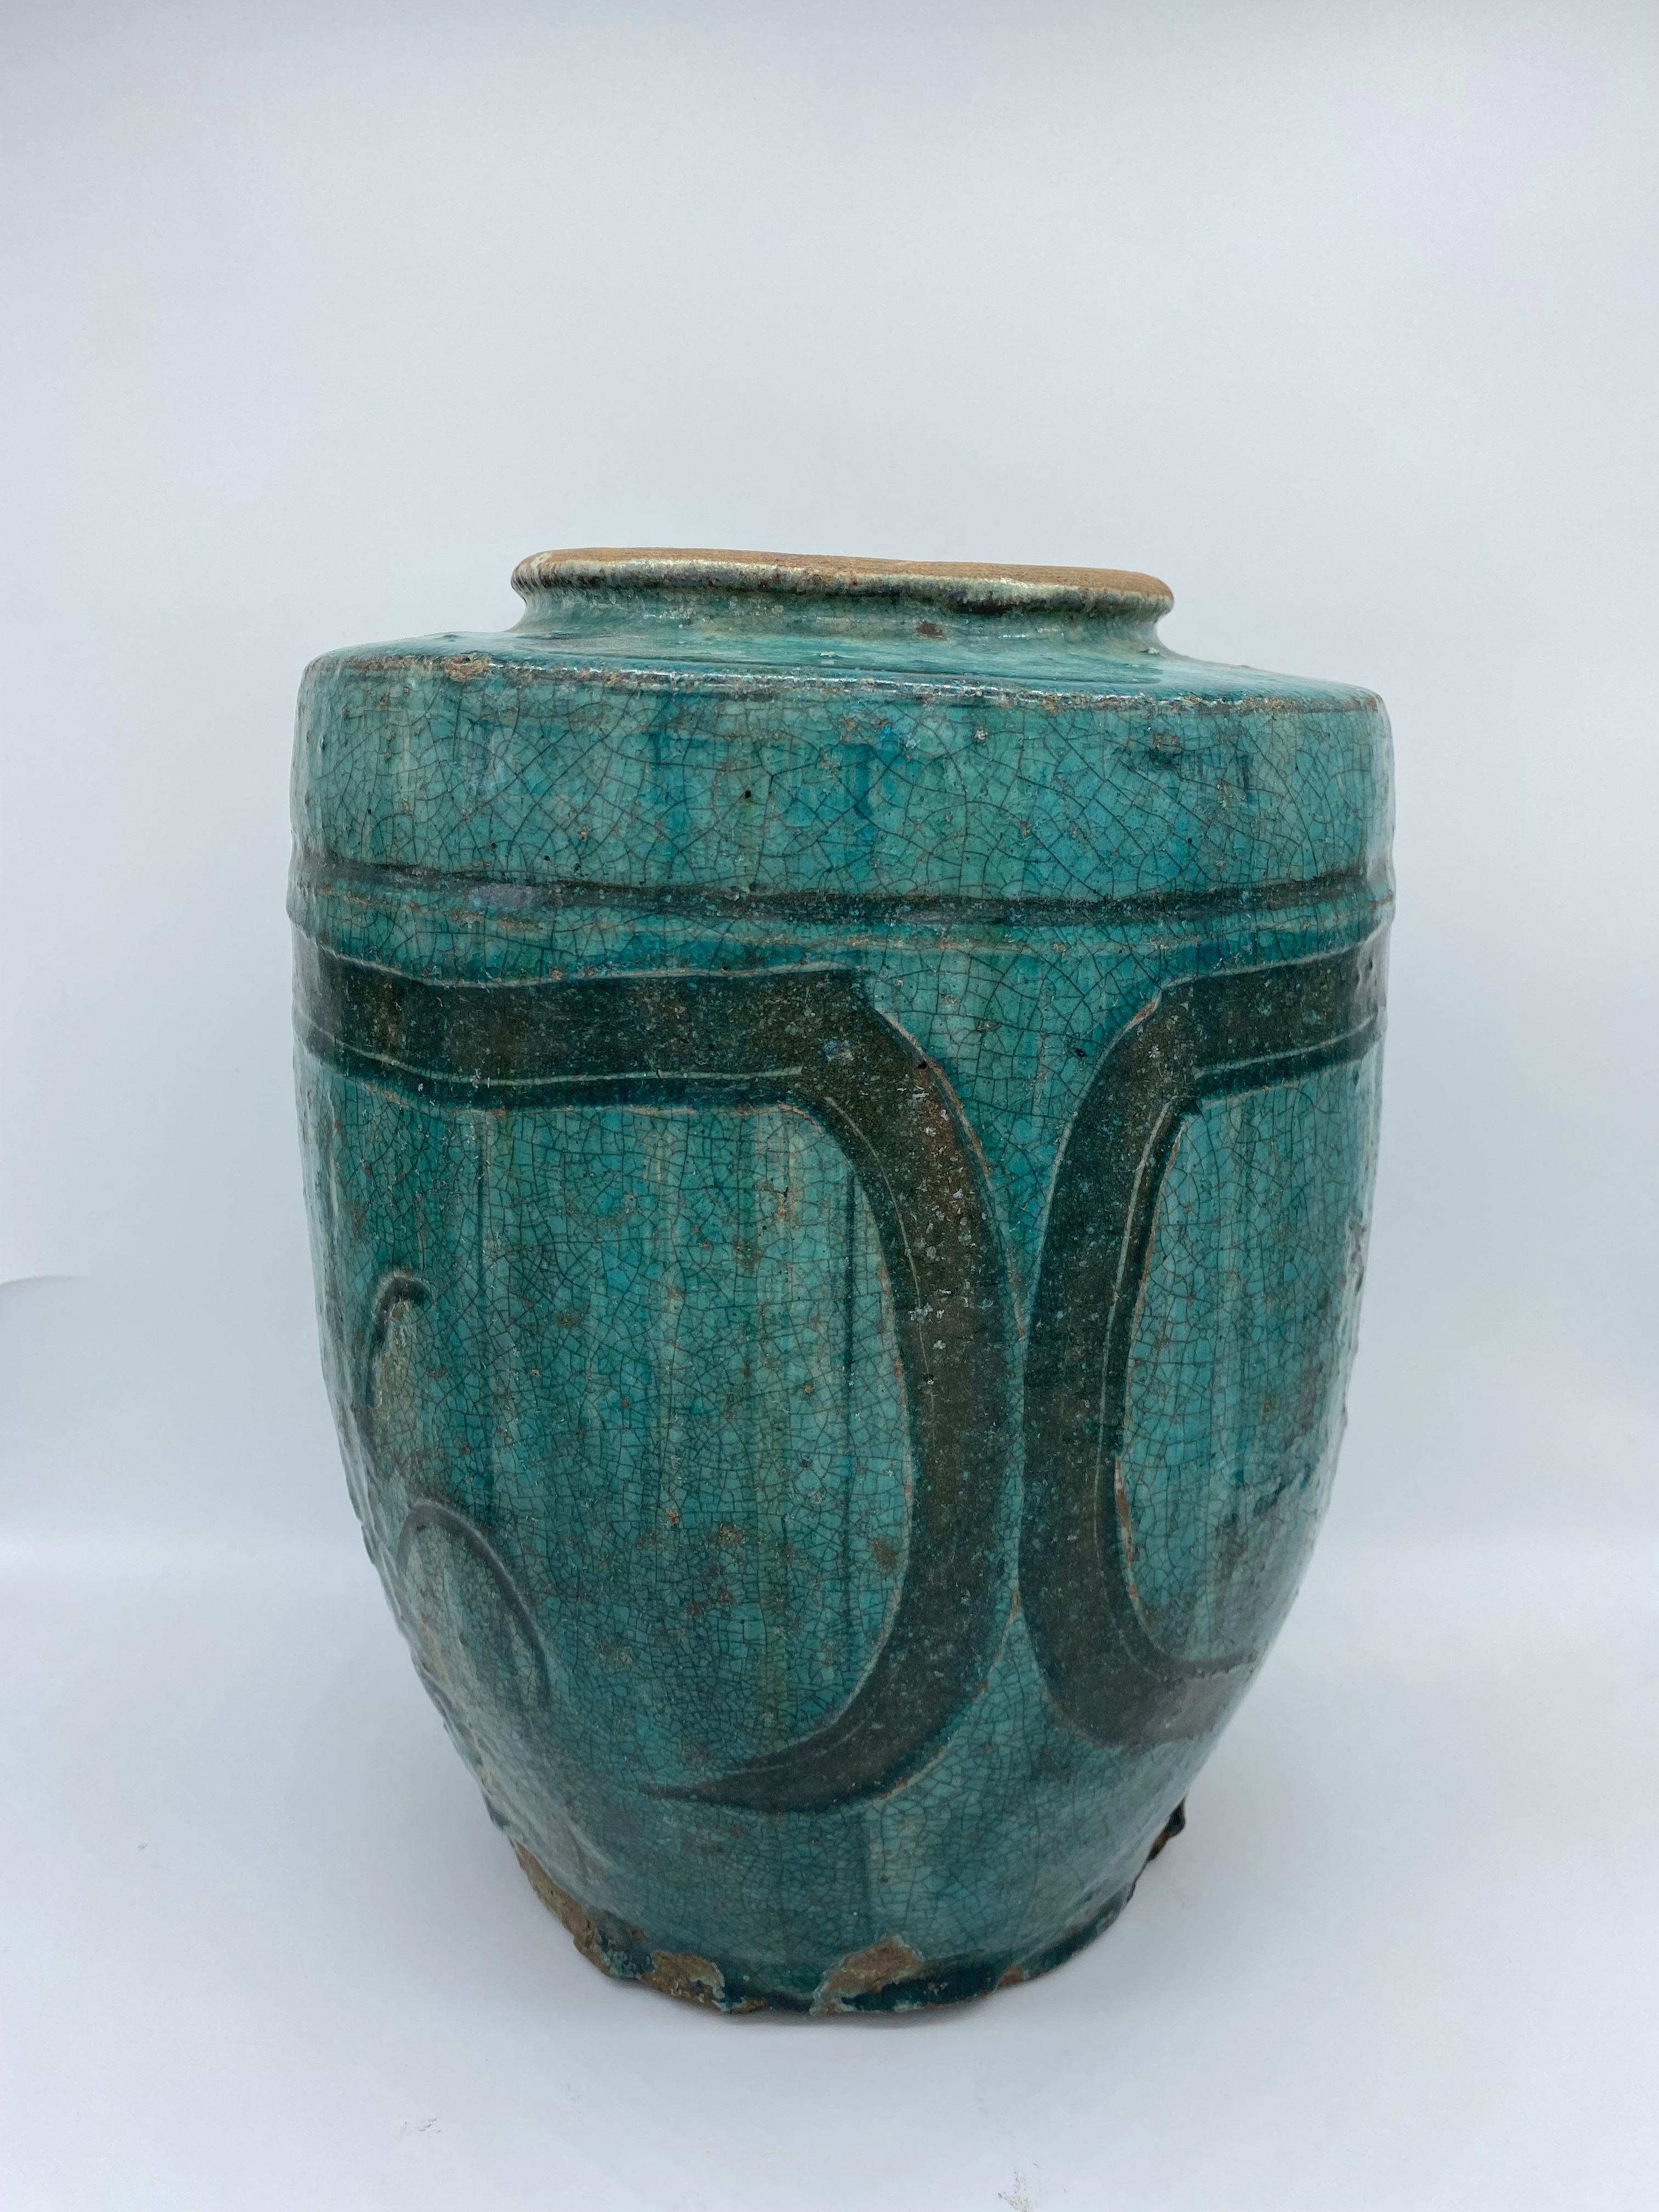 Very beautiful Martaban style jar from the 19th century.
Its turquoise blue glaze called 